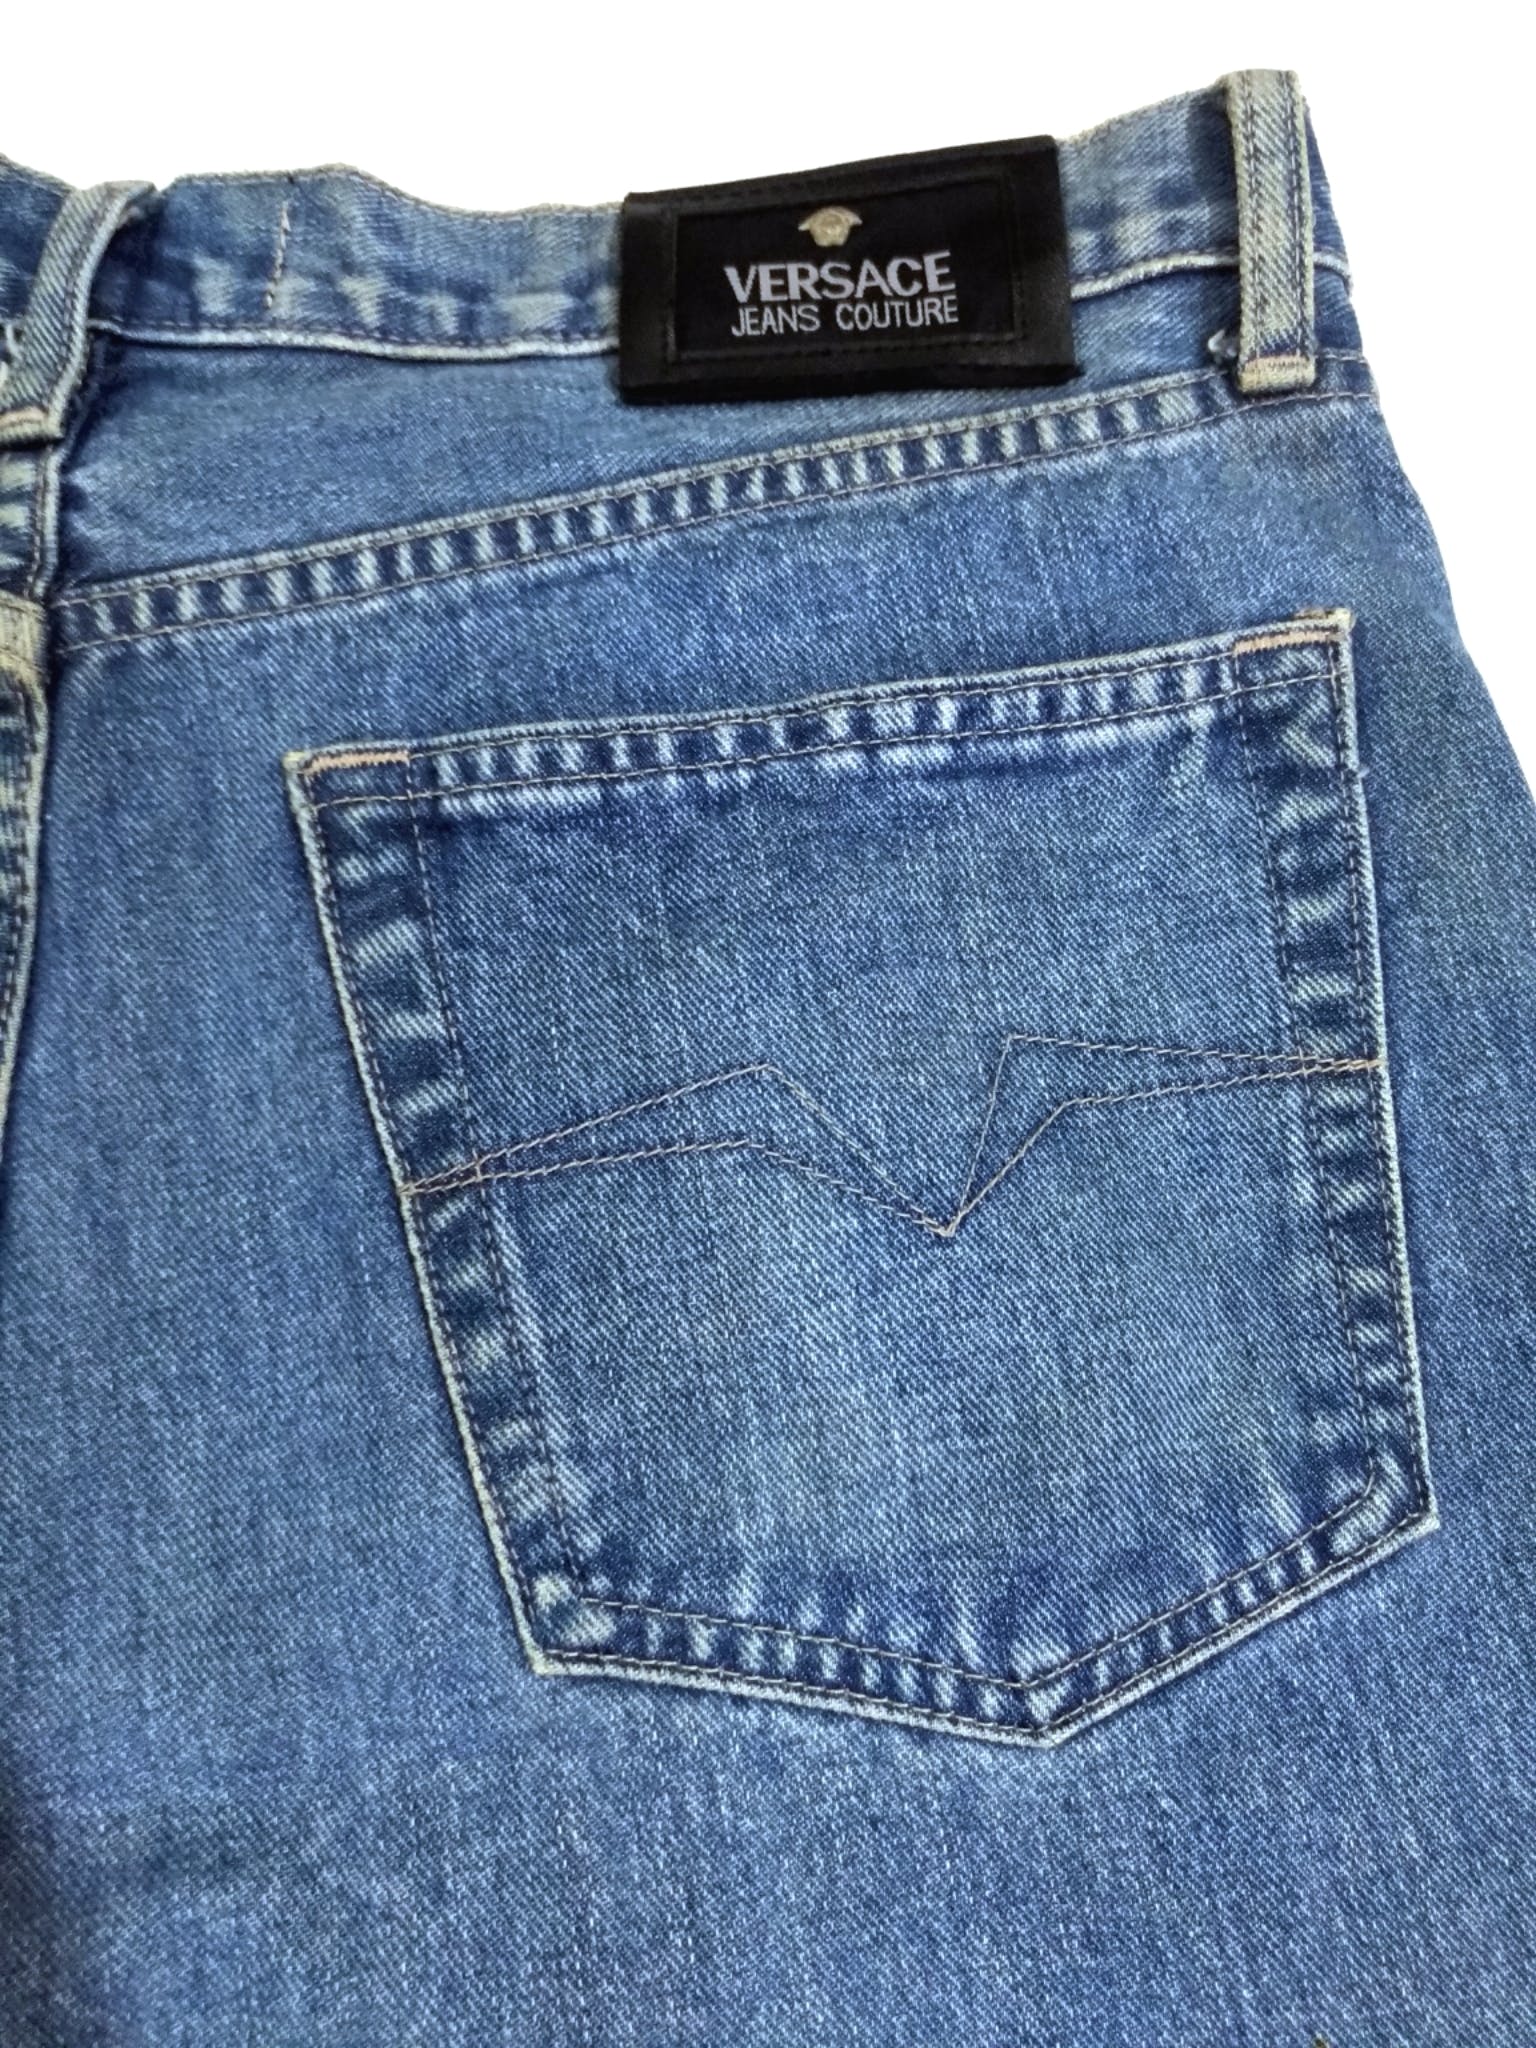 RARE!VTG 90s VERSACE JEANS COUTURE MADE IN ITALY BLUE DENIM - 3